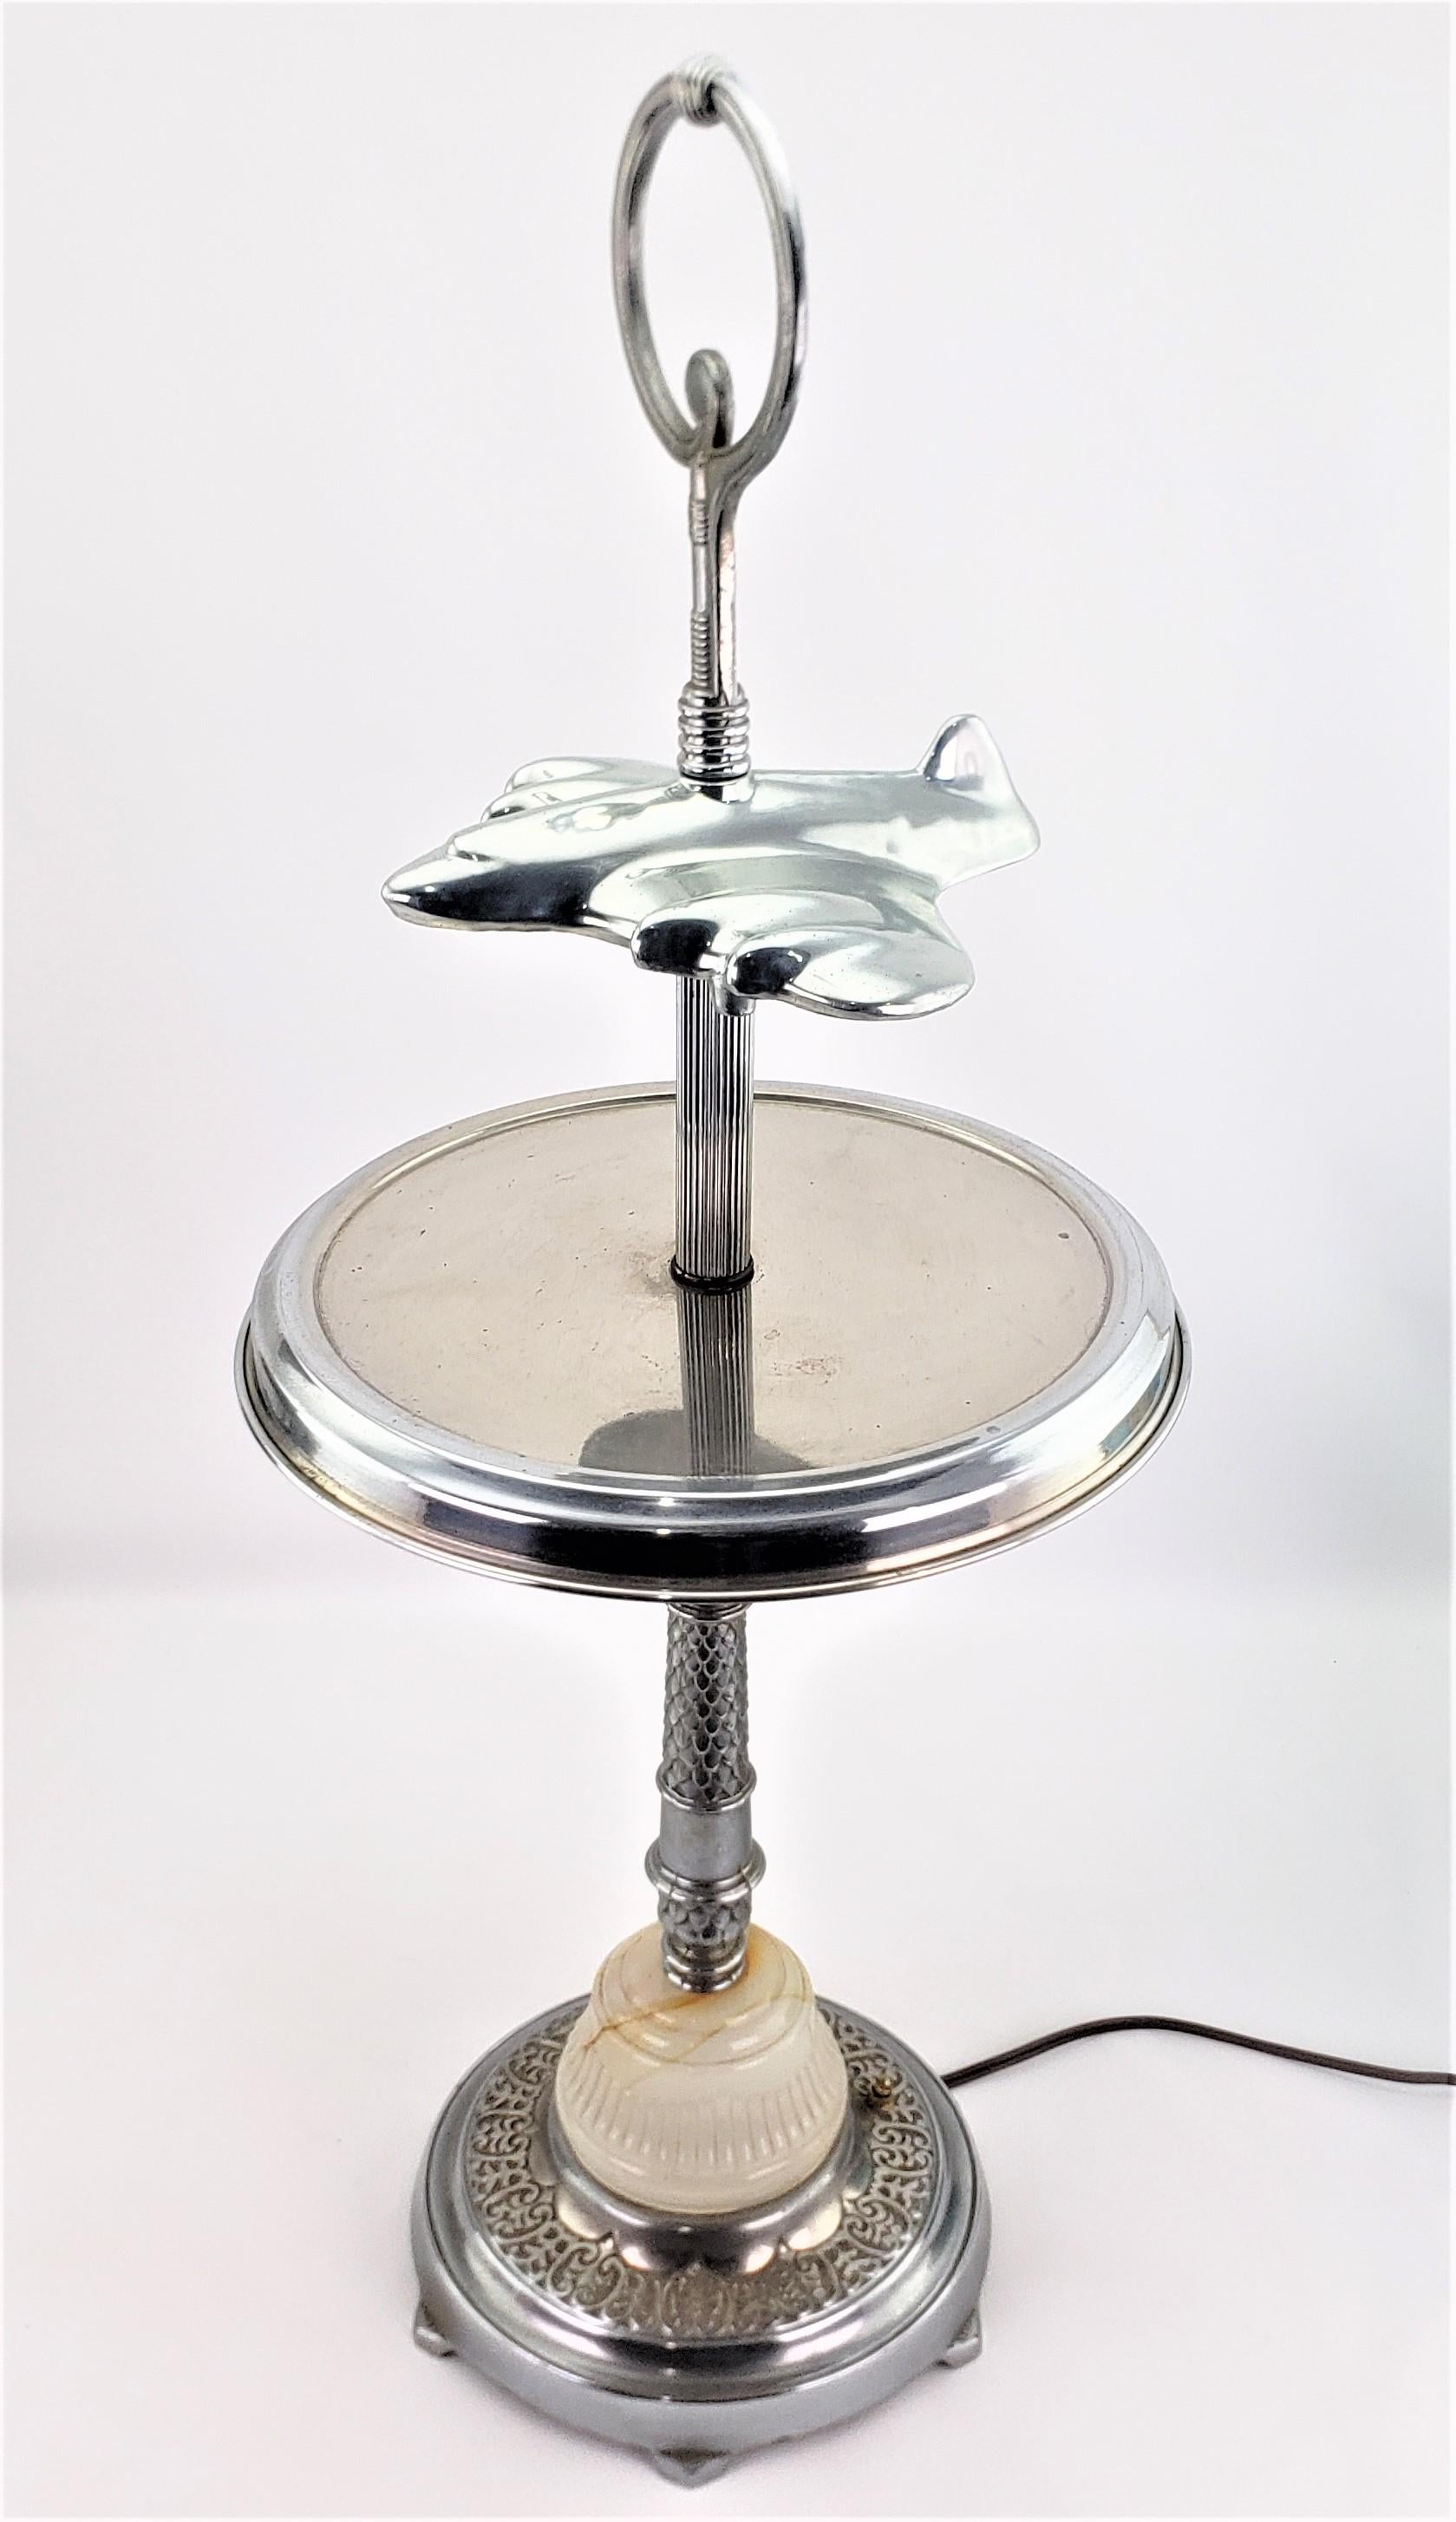 American Unique Art Deco Styled Chrome Jet Airplane Lighted Smoker's Stand or Table For Sale